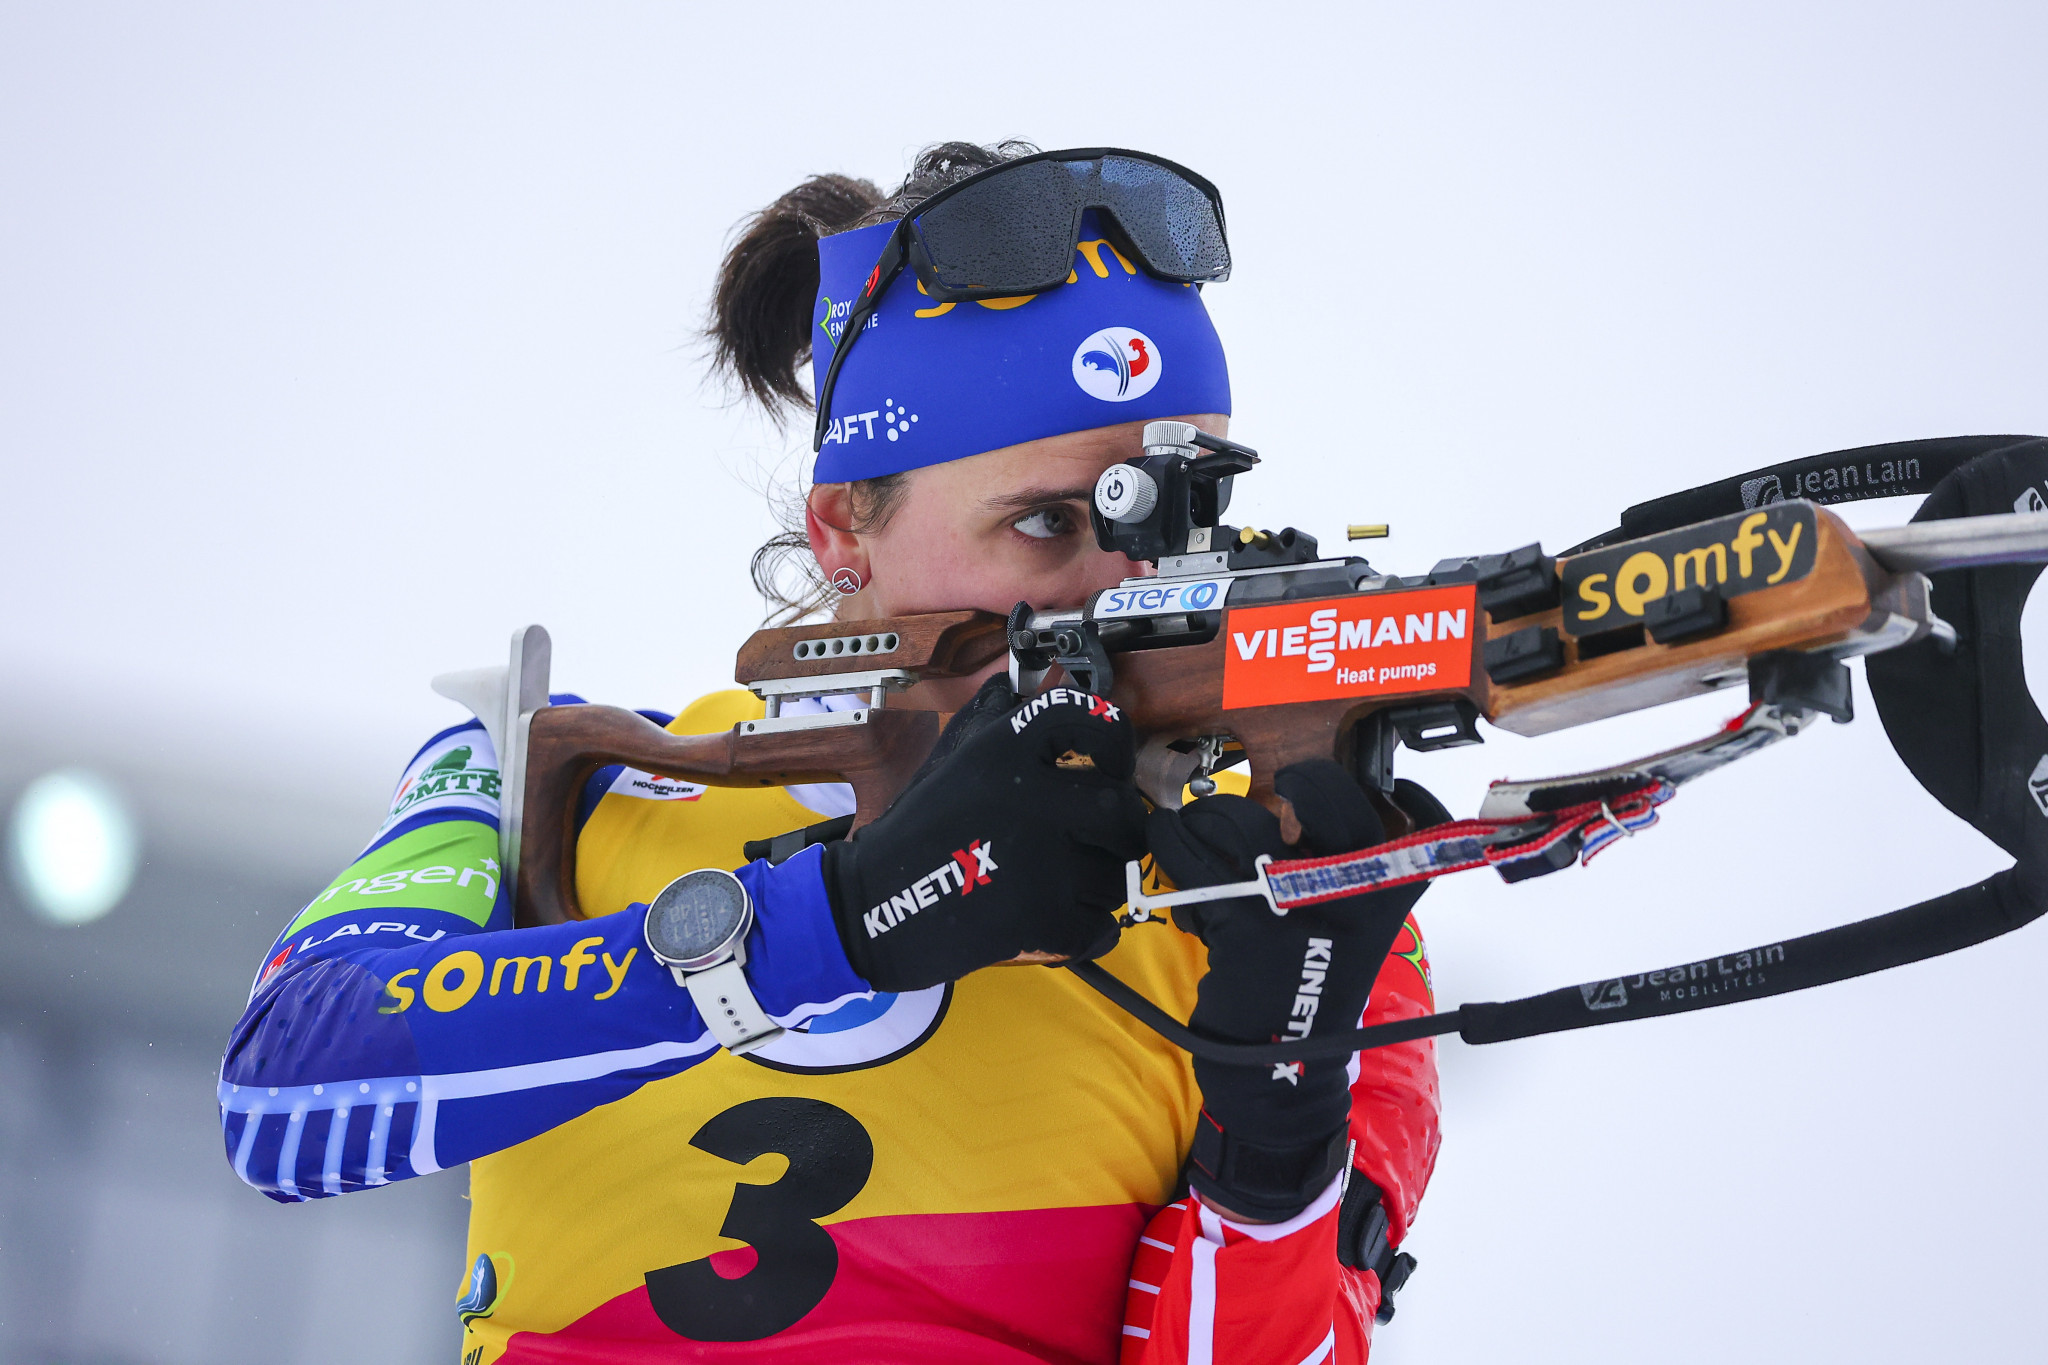 The accurate shooting of Julia Simon has helped her lead the early IBU World Cup standings and she will be confident of more success in front of her home crowd in Annecy ©Getty Images